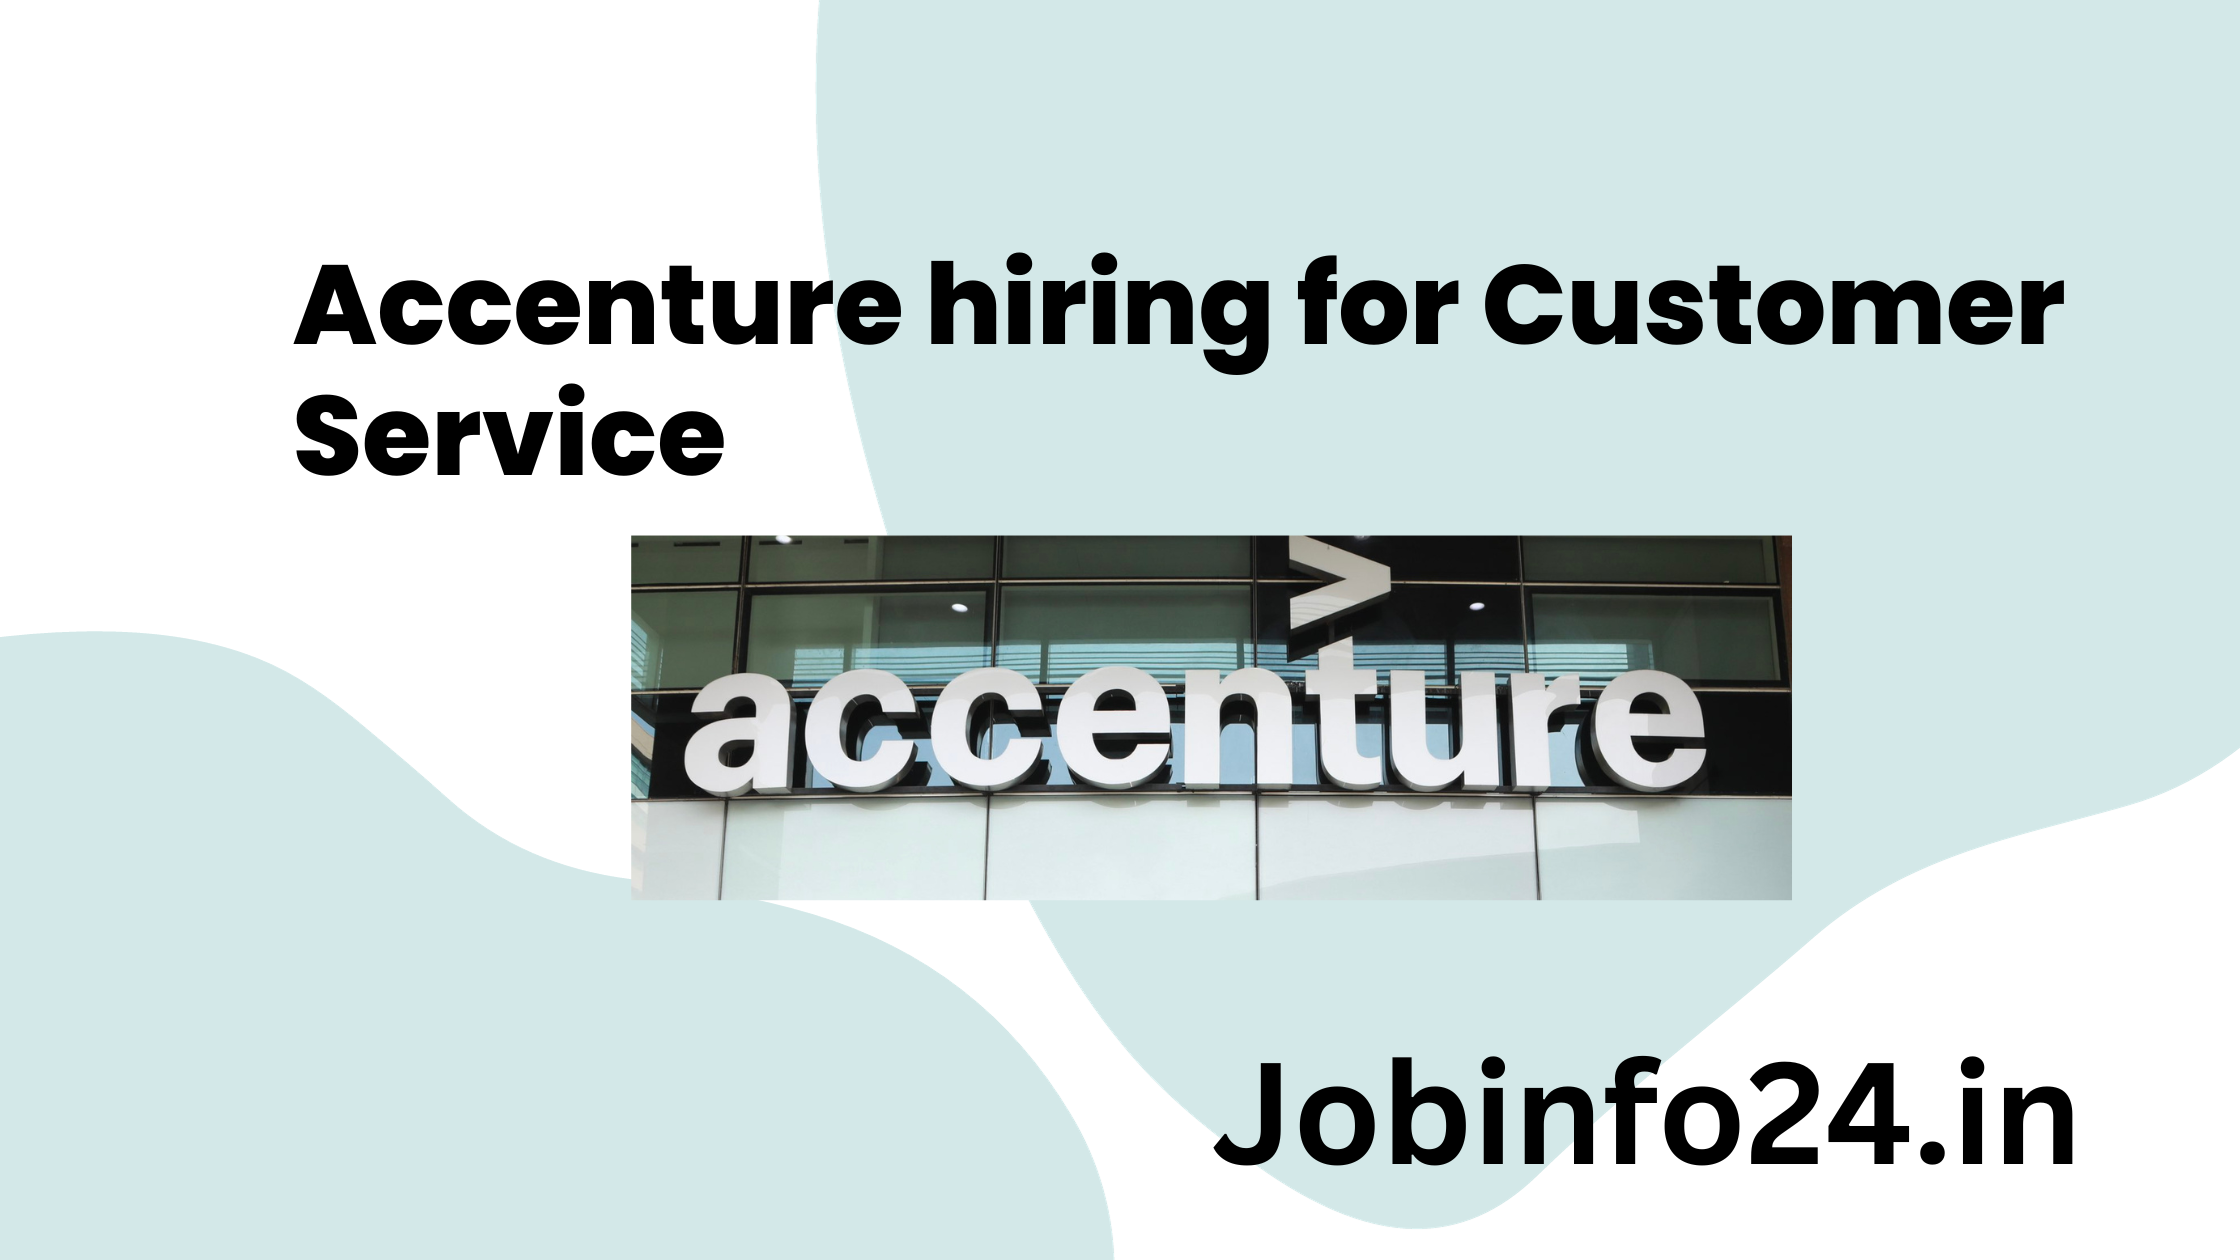 Accenture hiring for Customer Service